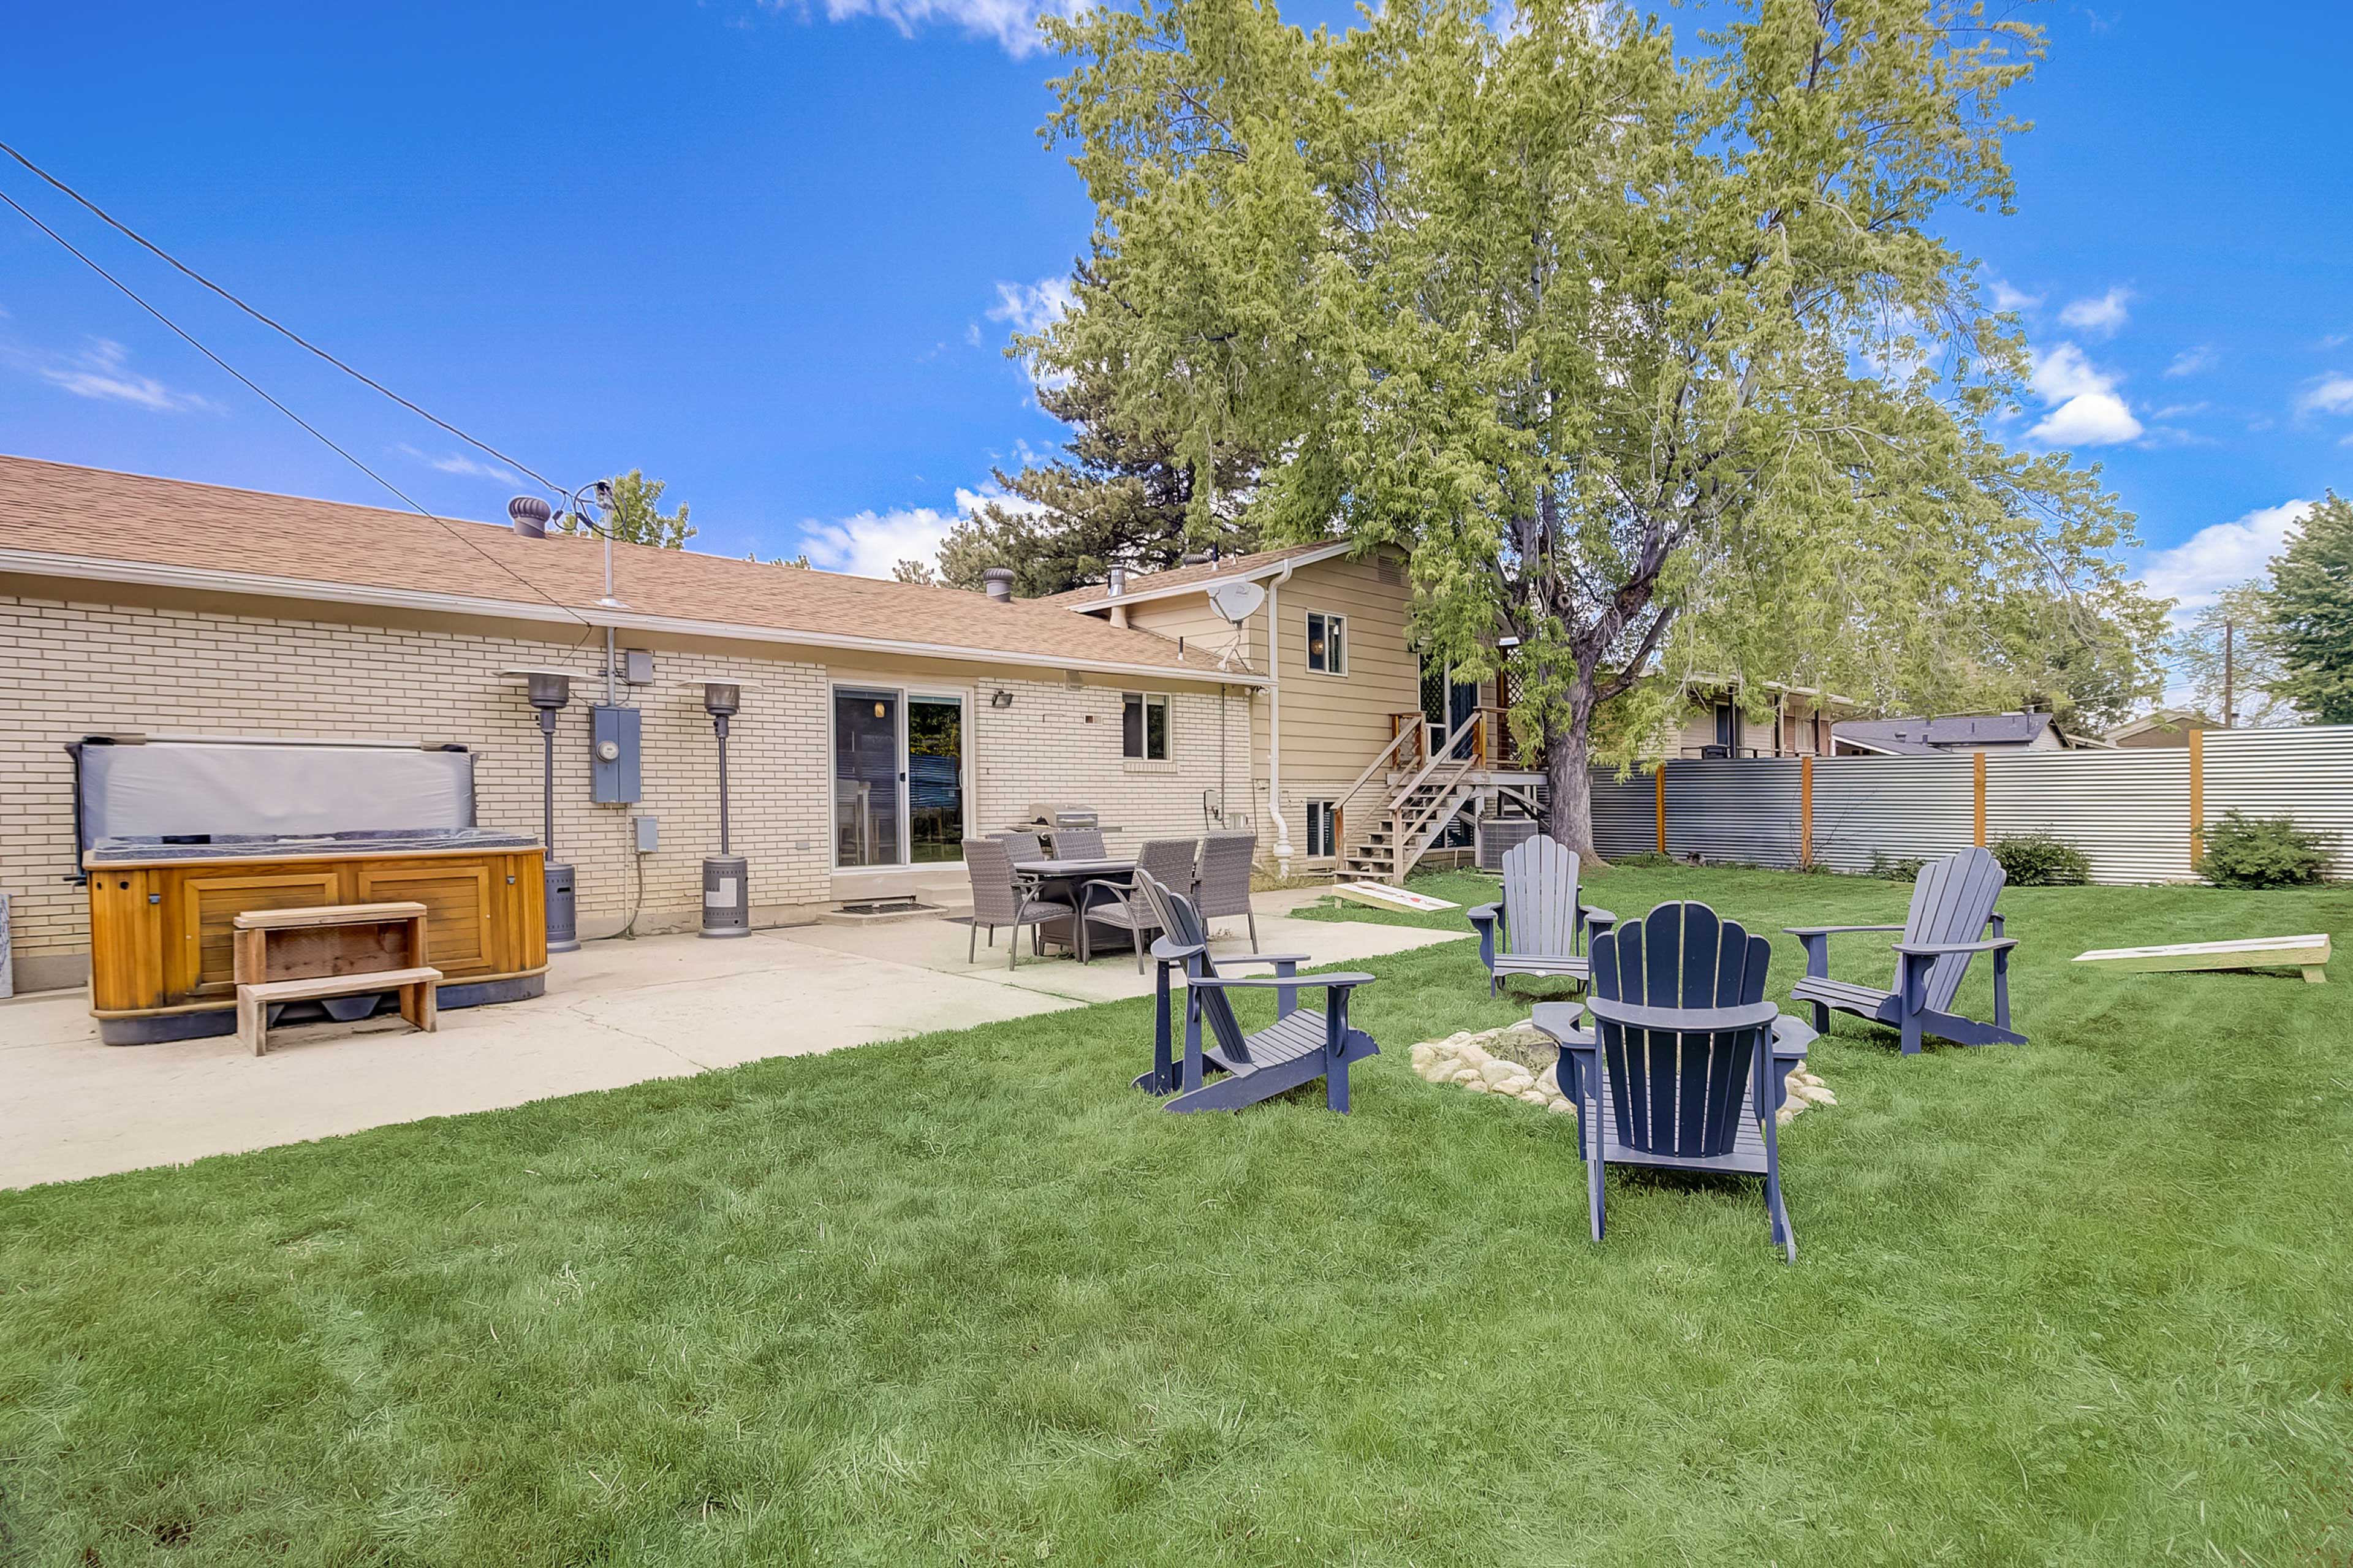 Cottonwood Heights House: Deck with Hot Tub!